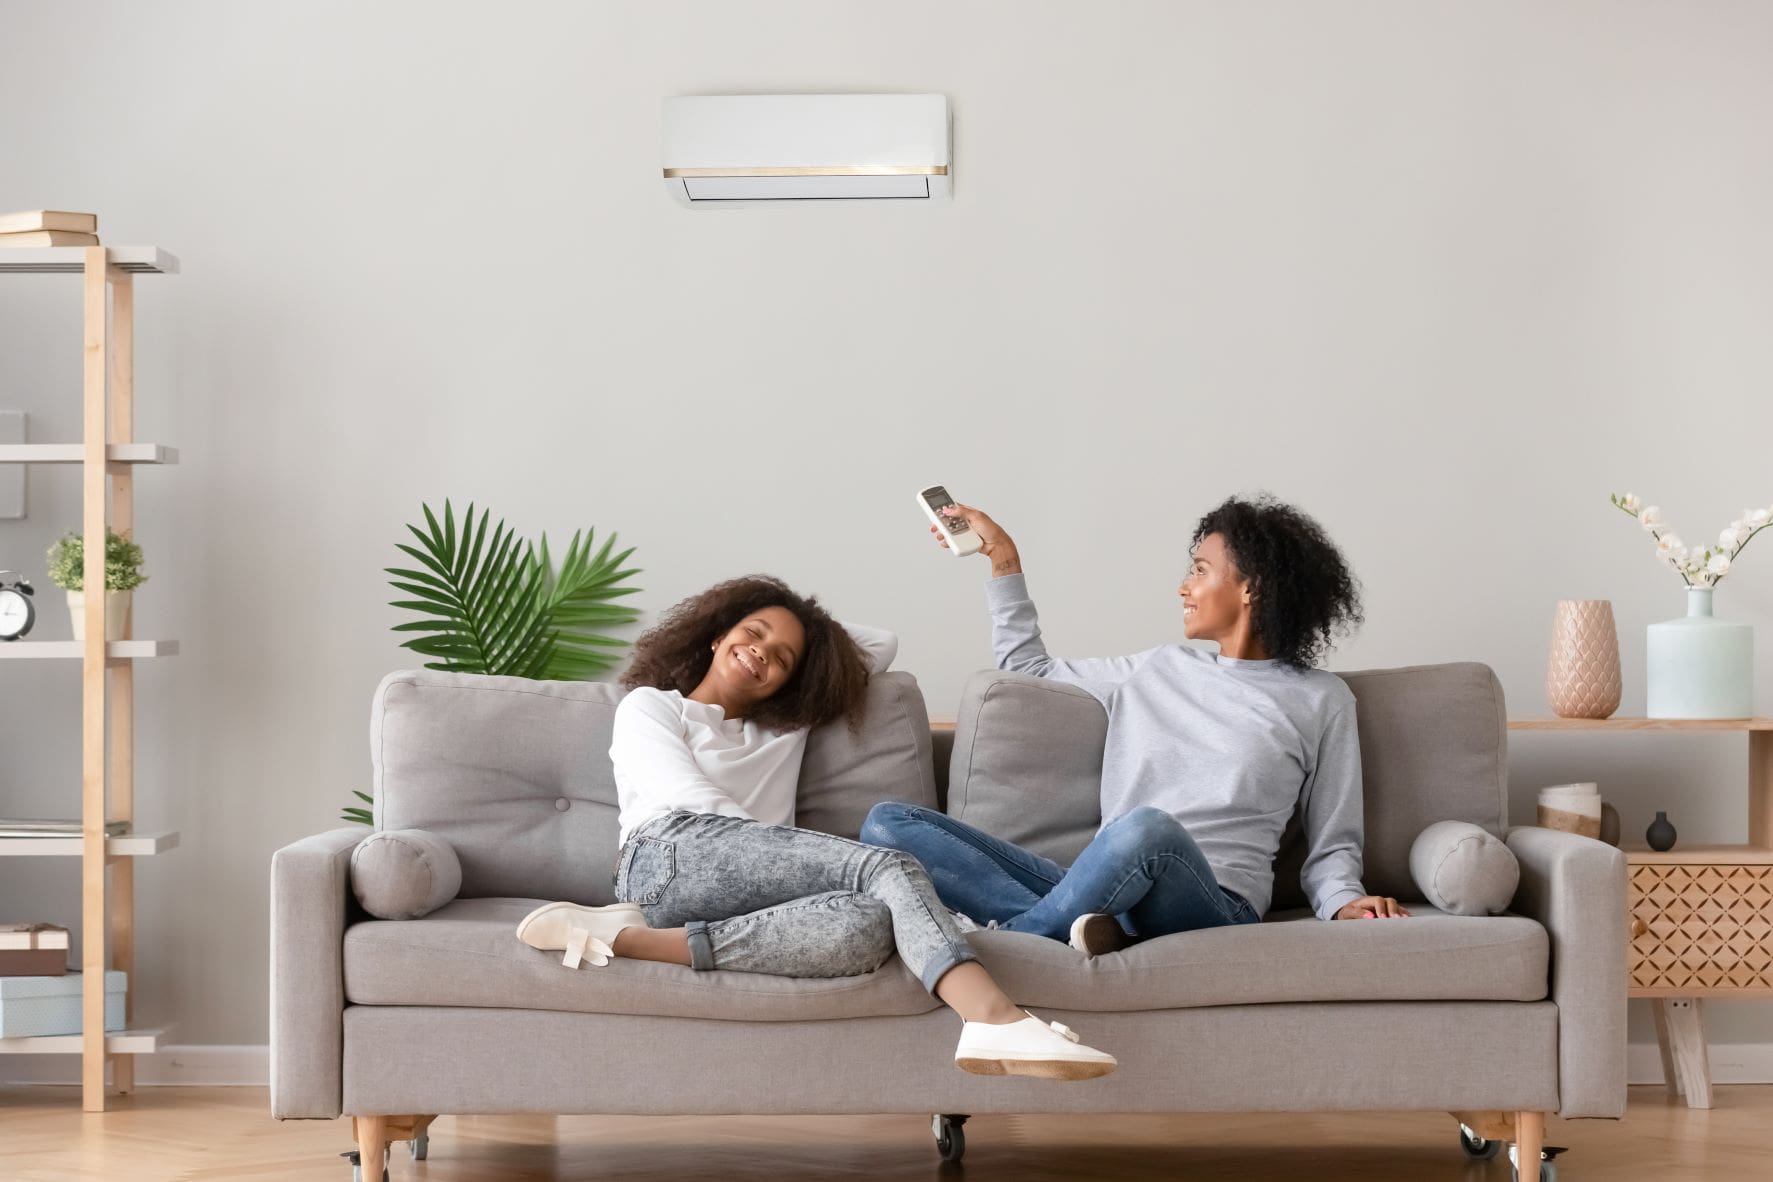 When Is The Best Time To Buy An Air Conditioner